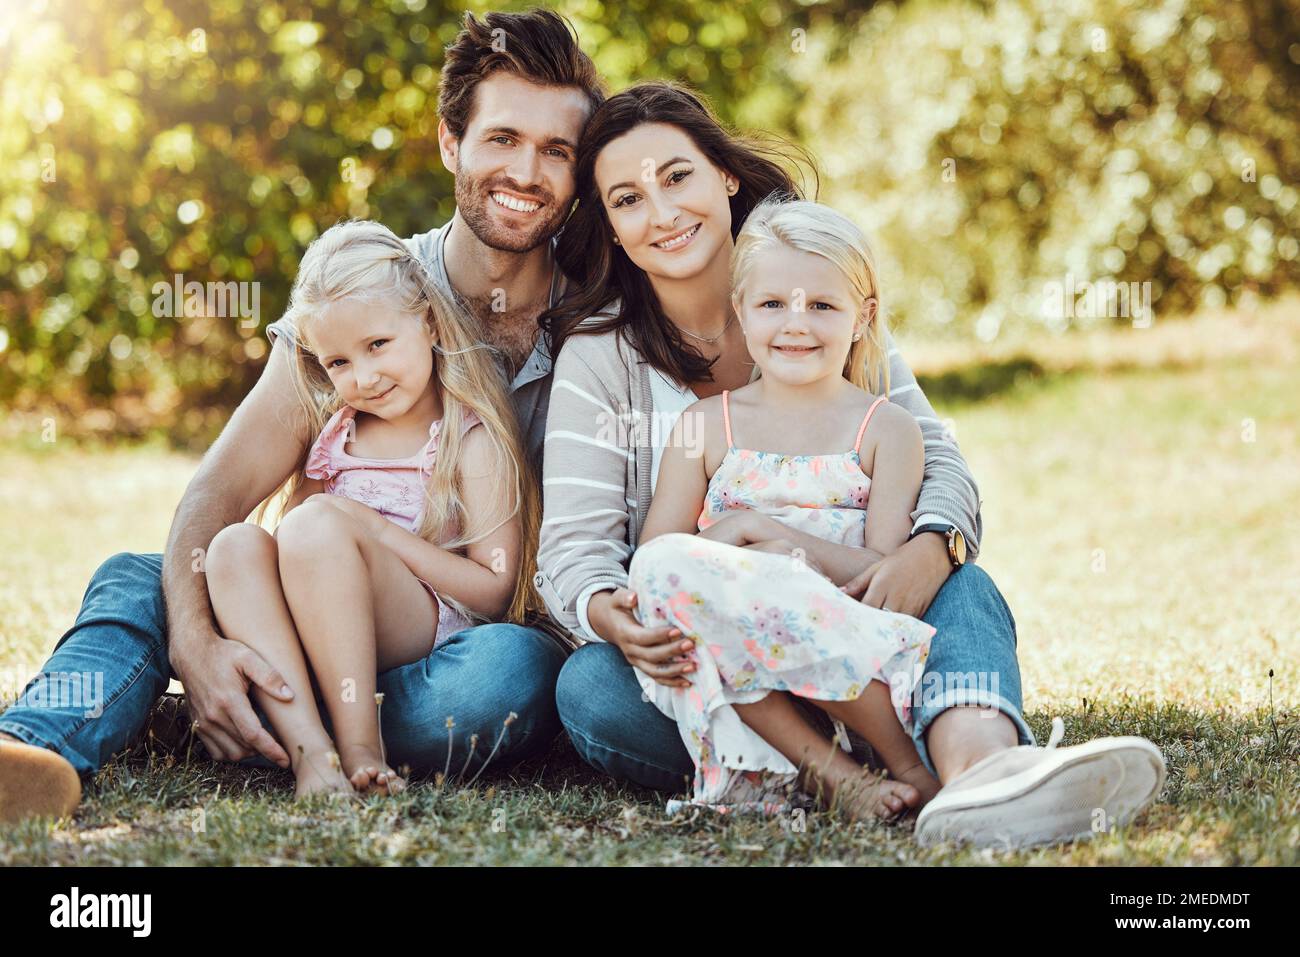 Family, garden and portrait of parents, children and happy people on park grass in sunshine. Kids, mom and dad smile with love in nature, holiday and Stock Photo